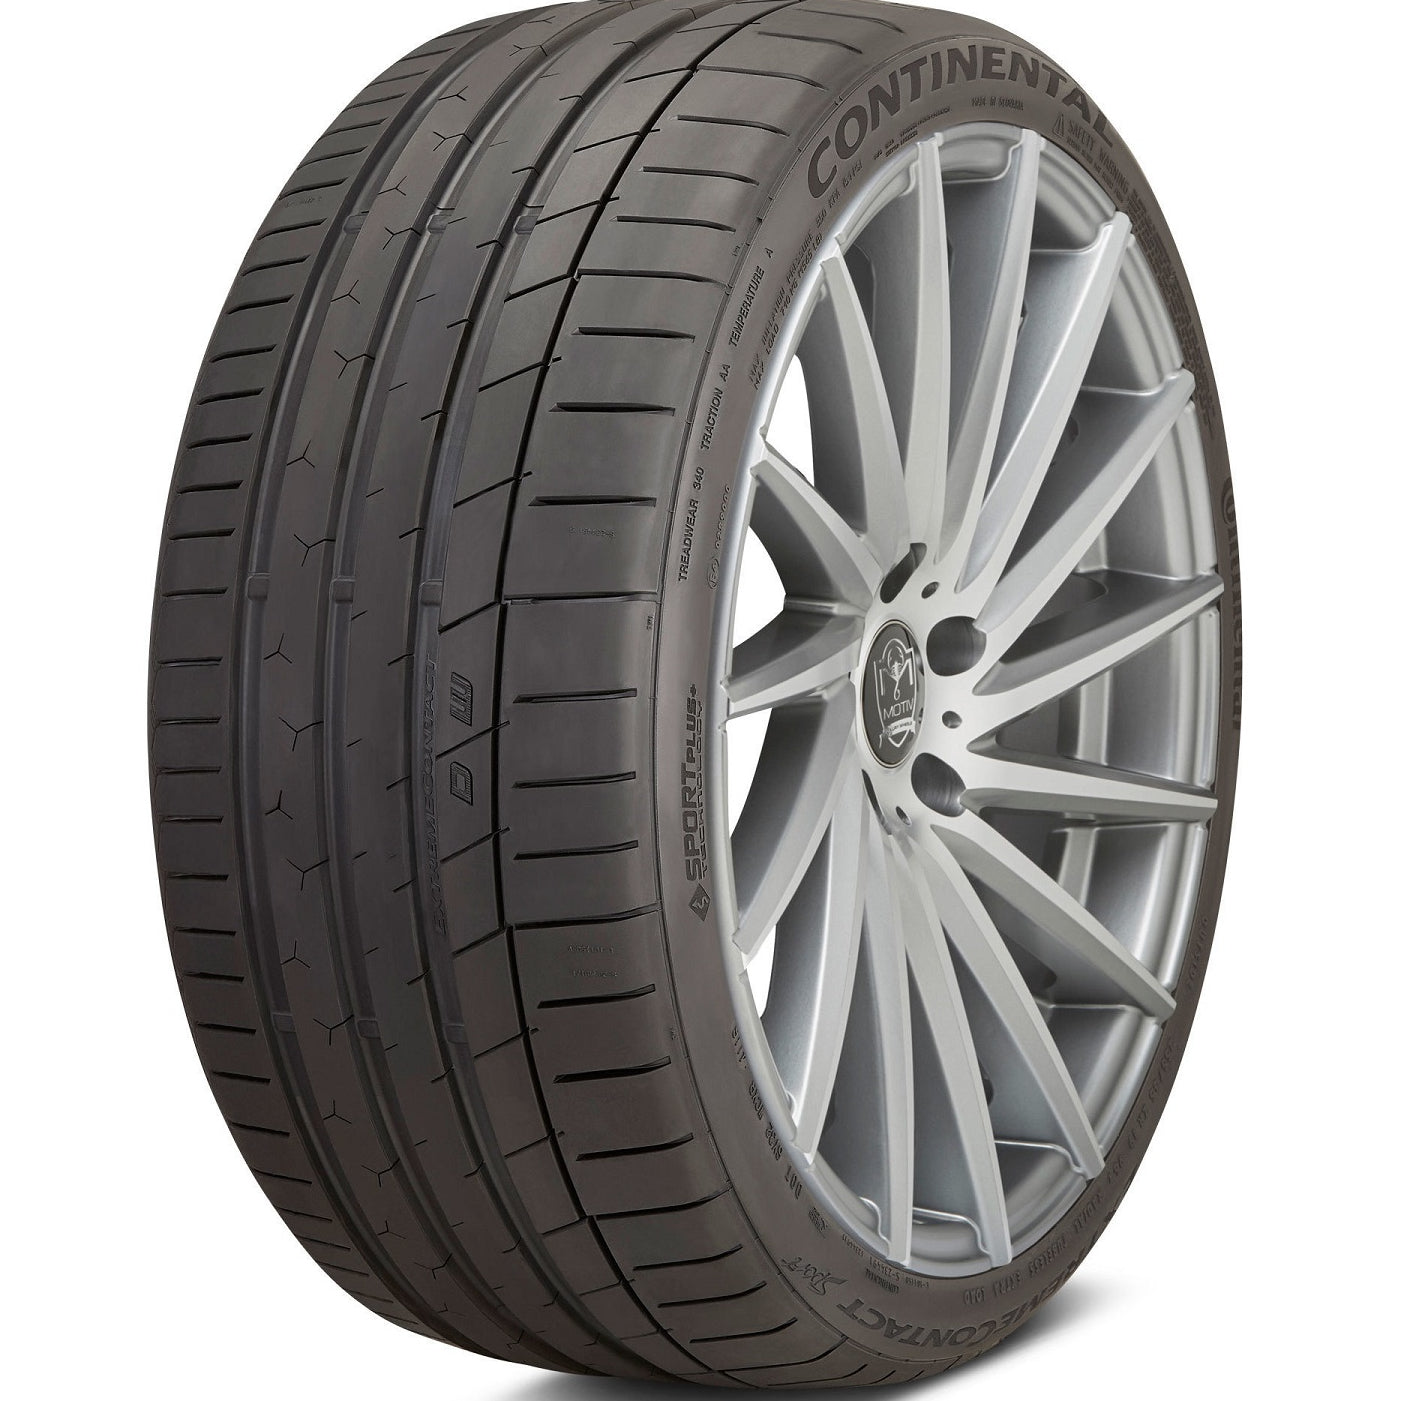 CONTINENTAL EXTREMECONTACT SPORT 275/30ZR20 (26.5X10.8R 20) Tires